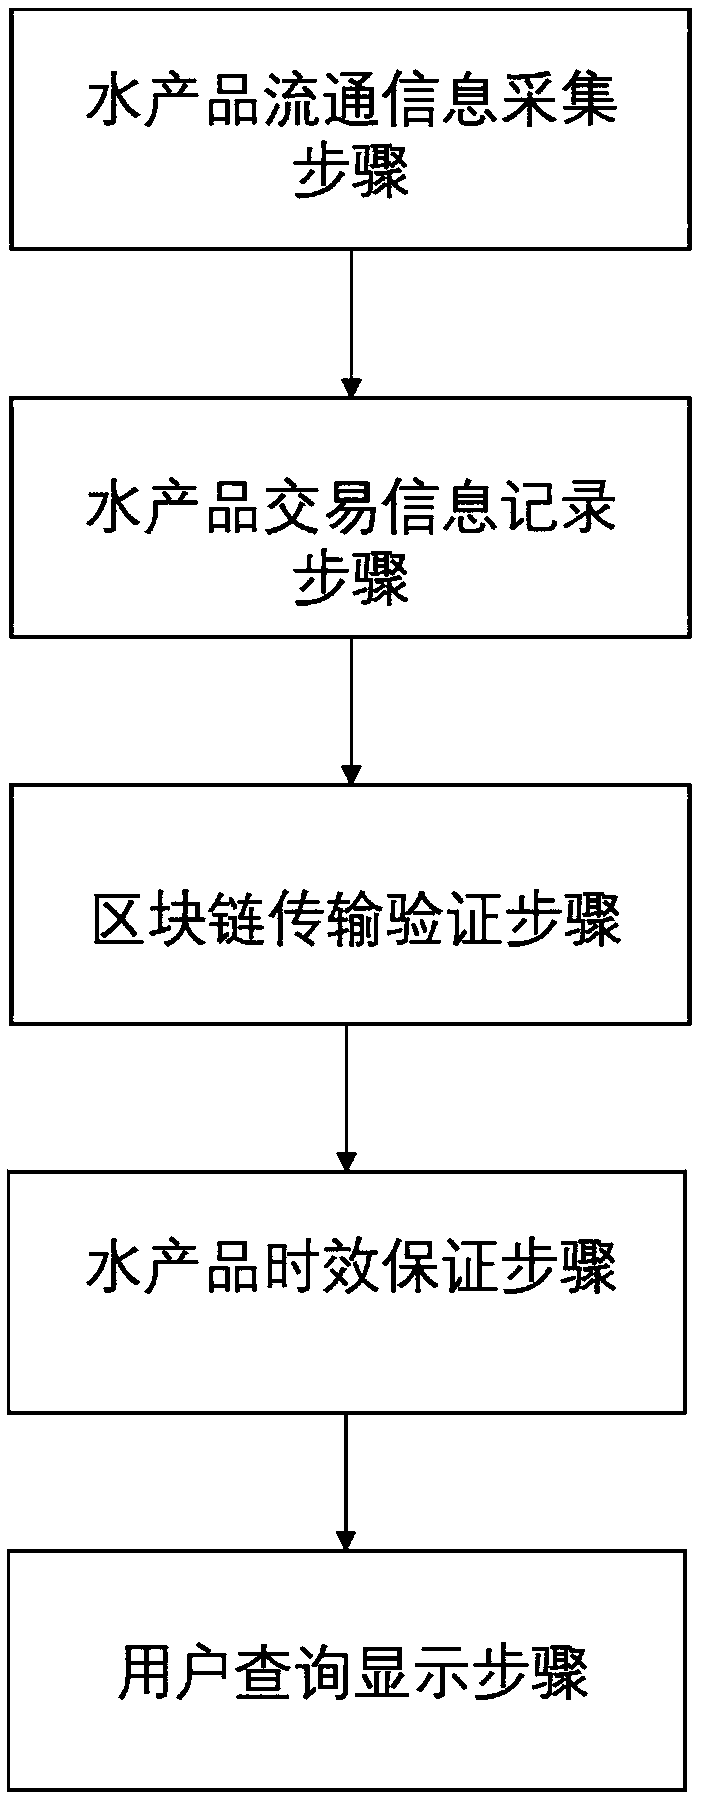 Aquatic product circulation tracking system and method based on block chain